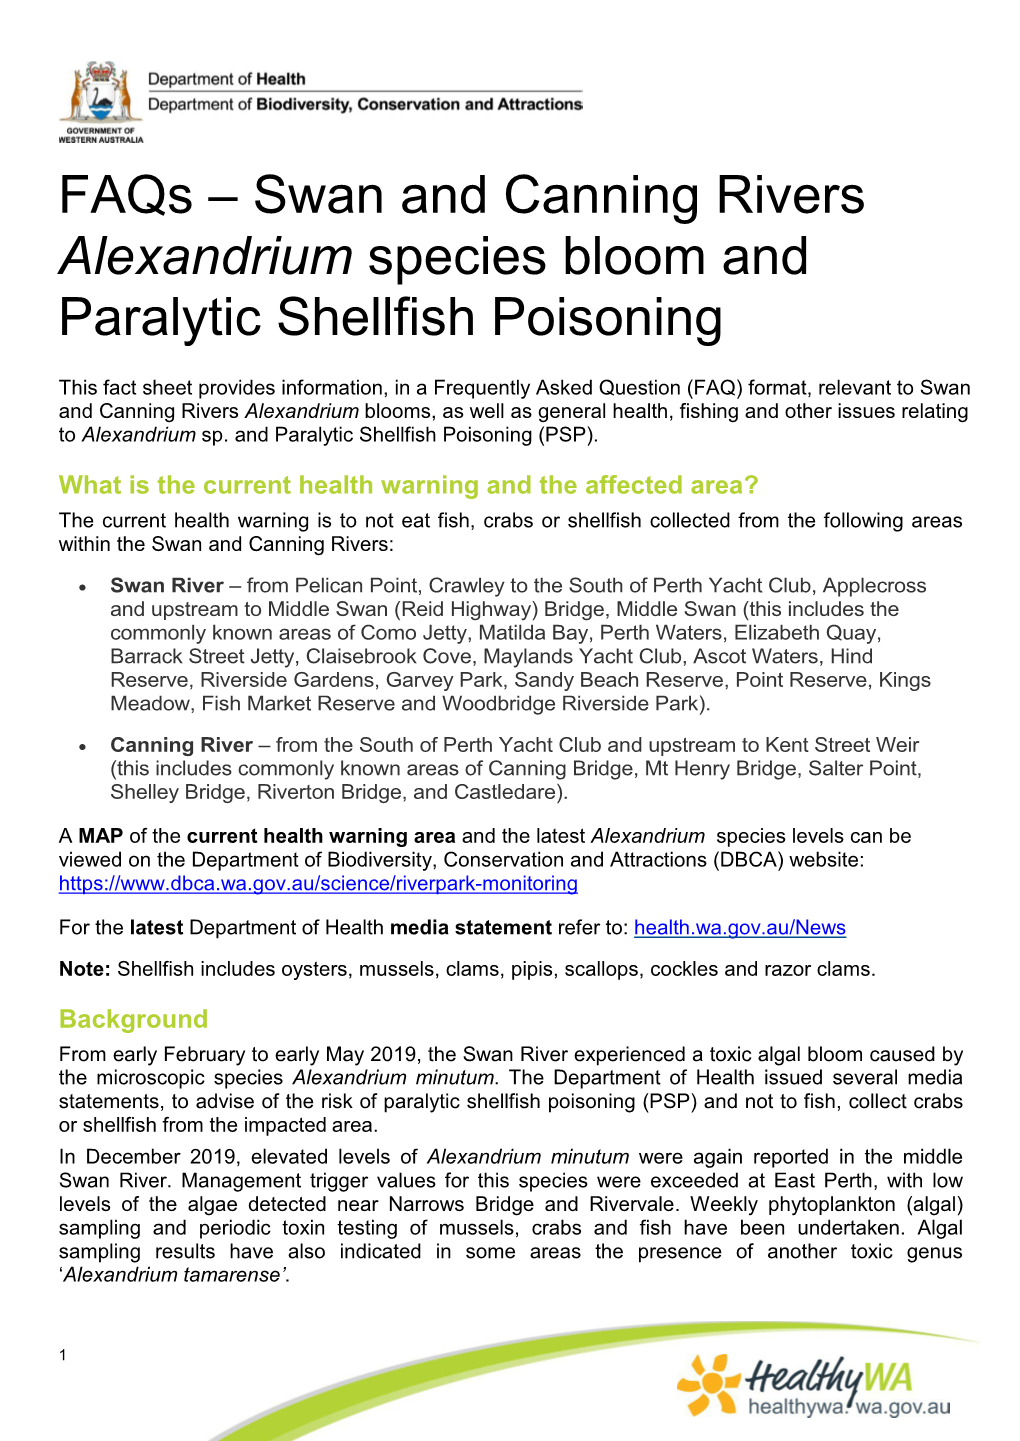 Faqs – Swan and Canning Rivers Alexandrium Species Bloom and Paralytic Shellfish Poisoning